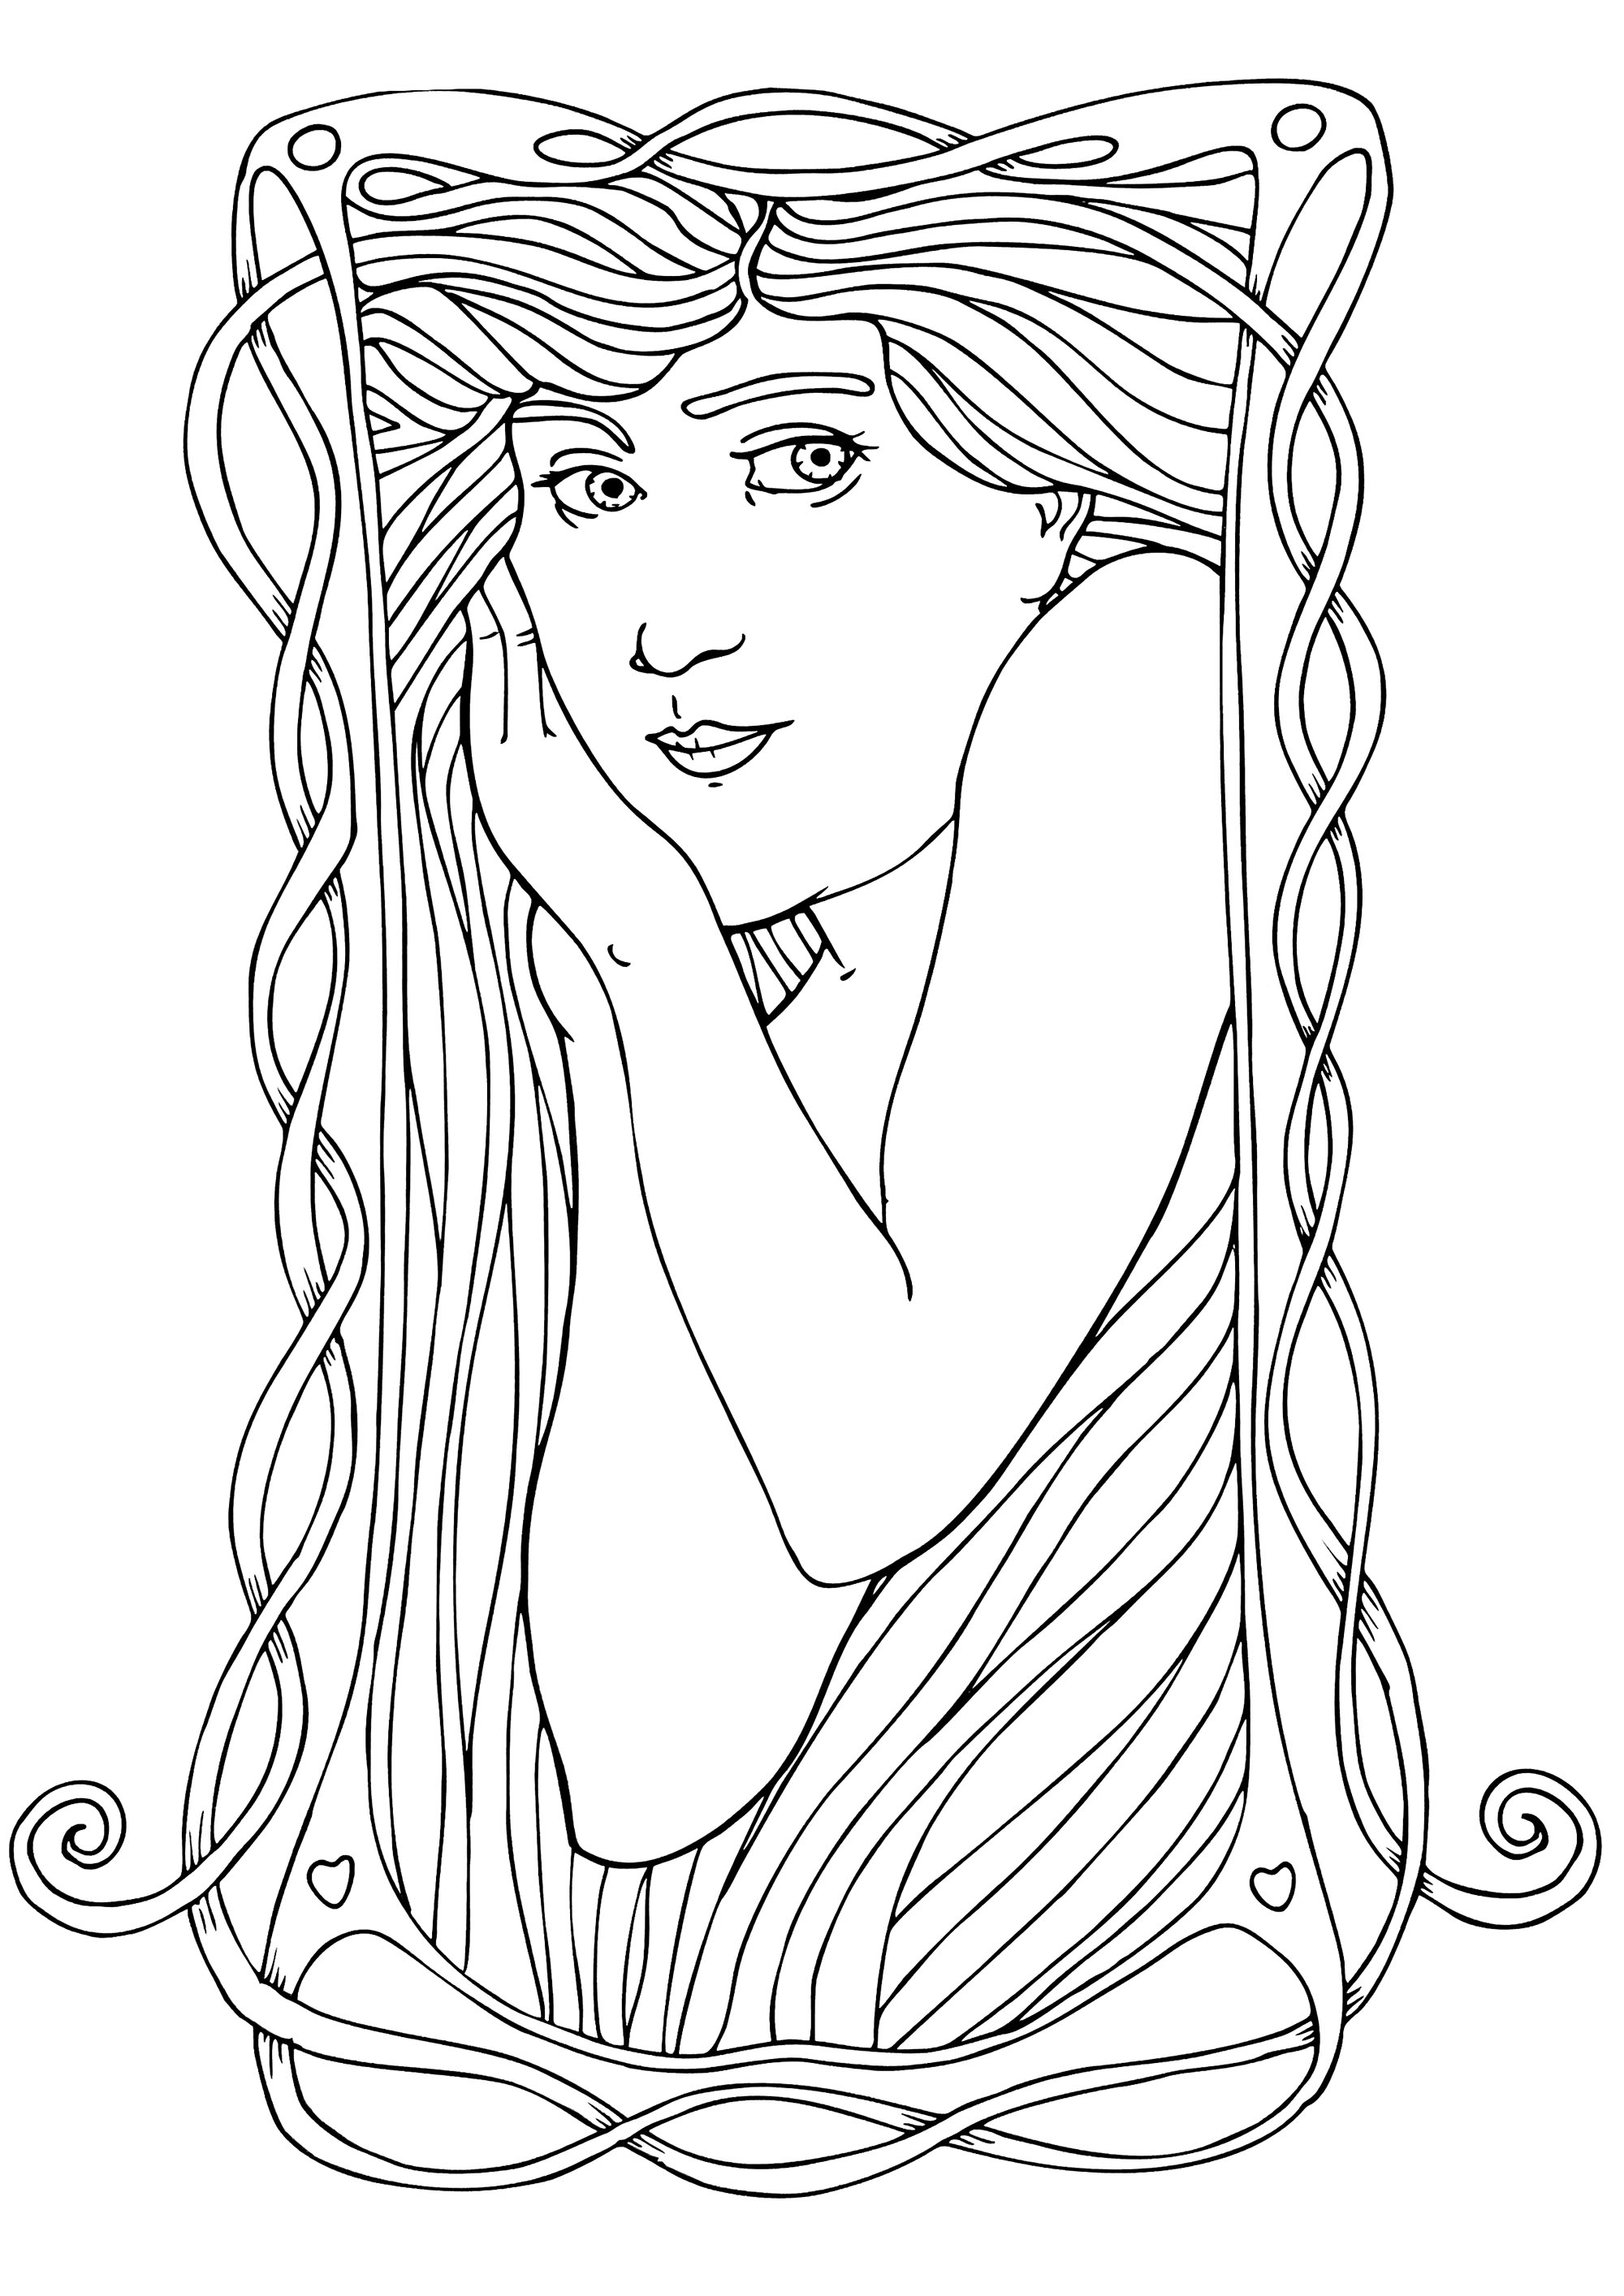 Representation of a woman with the Art Nouveau style, reproducing the style of Alfons Mucha, with few details